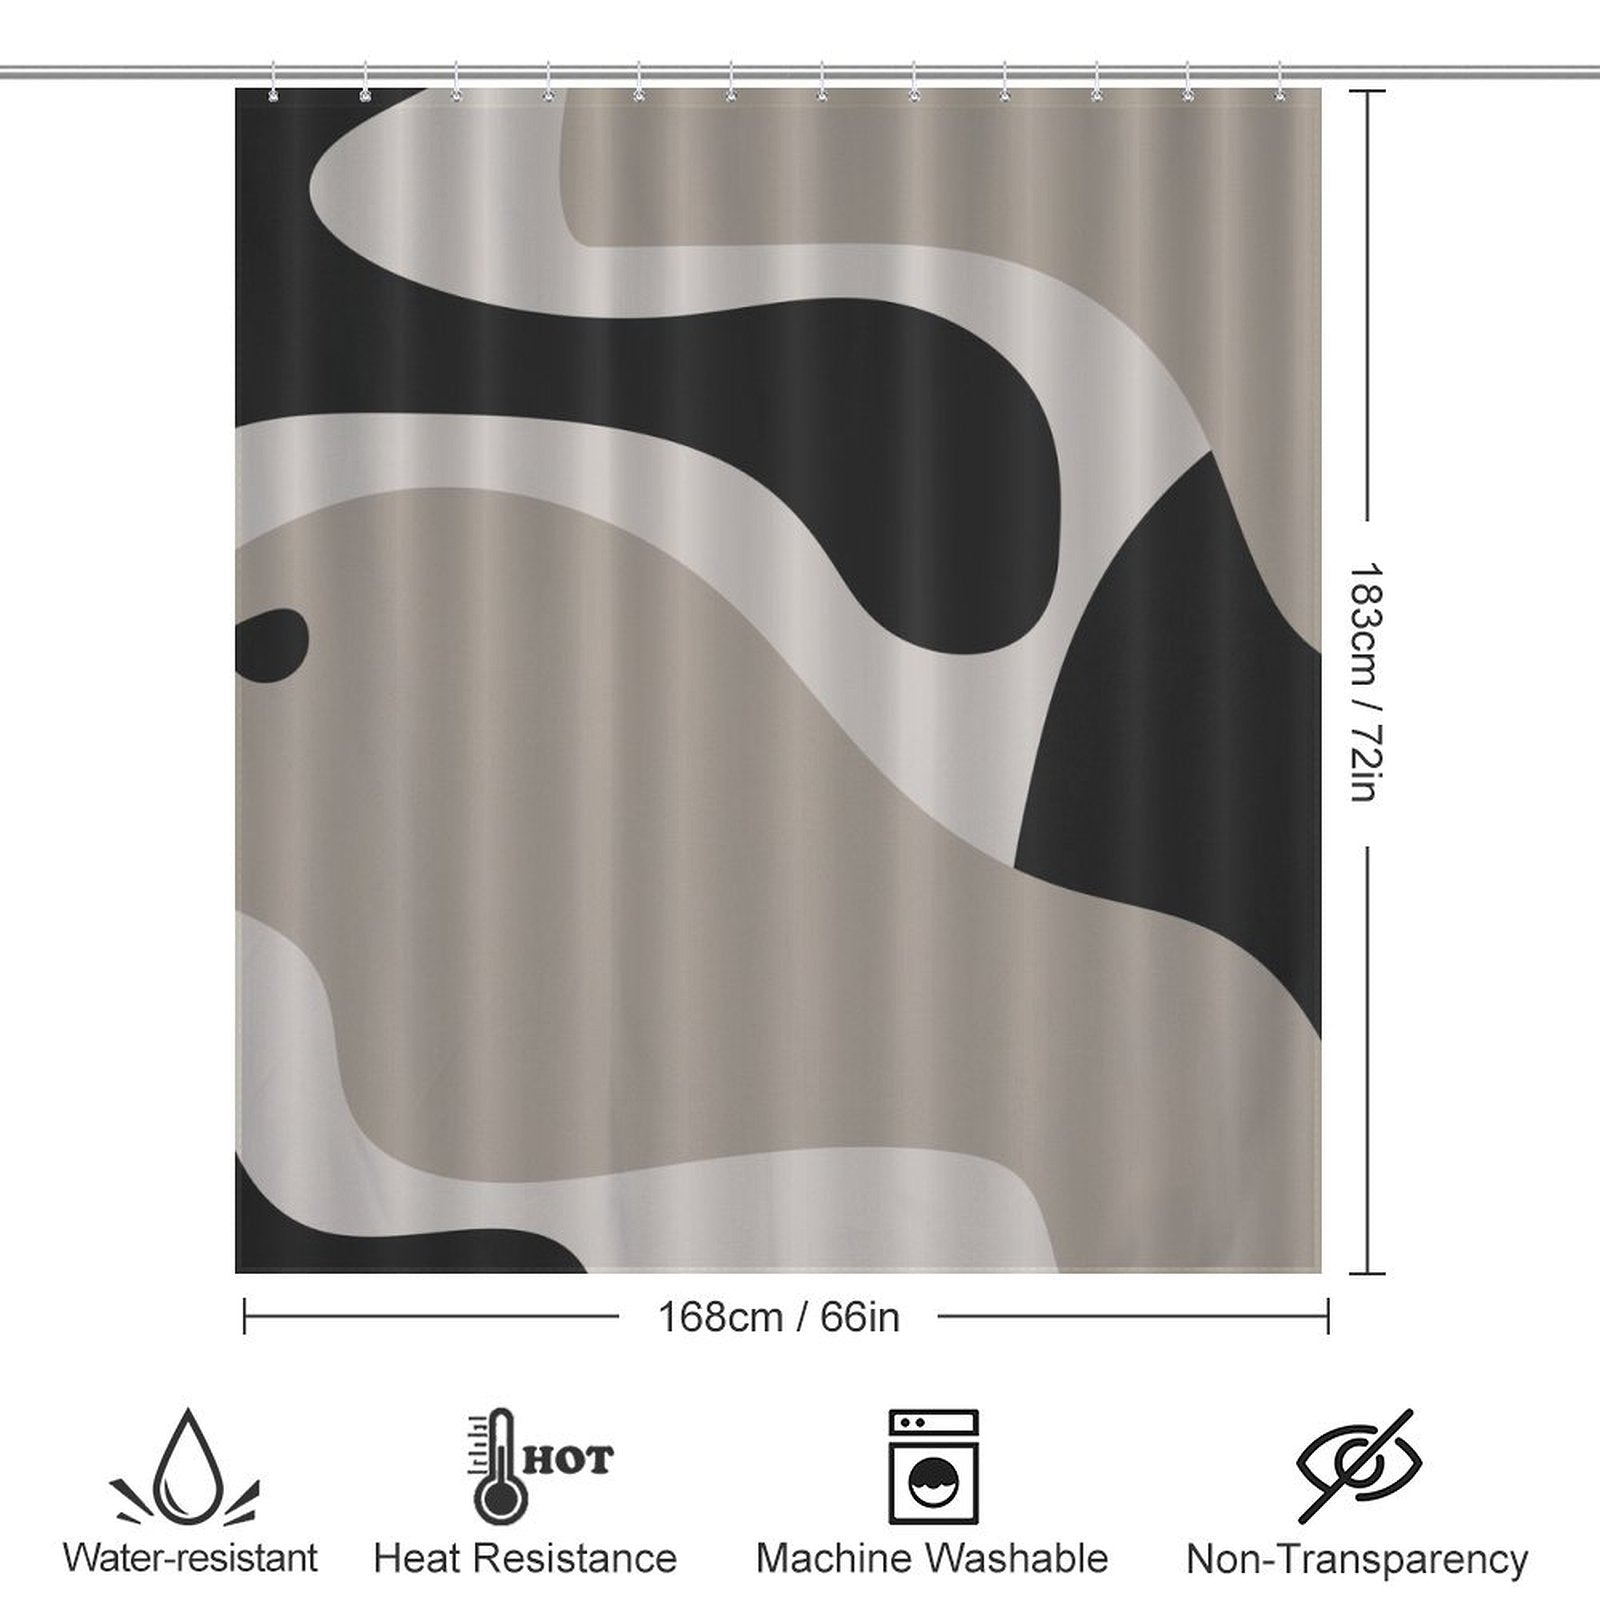 A Cotton Cat Modern Geometric Art Minimalist Curve Beige Black and Grey Abstract Shower Curtain-Cottoncat featuring minimalist abstract curves in black, white, and gray. Below are icons indicating it is water-resistant, heat-resistant, machine washable, and non-transparent. Dimensions are 183 cm x 168 cm.